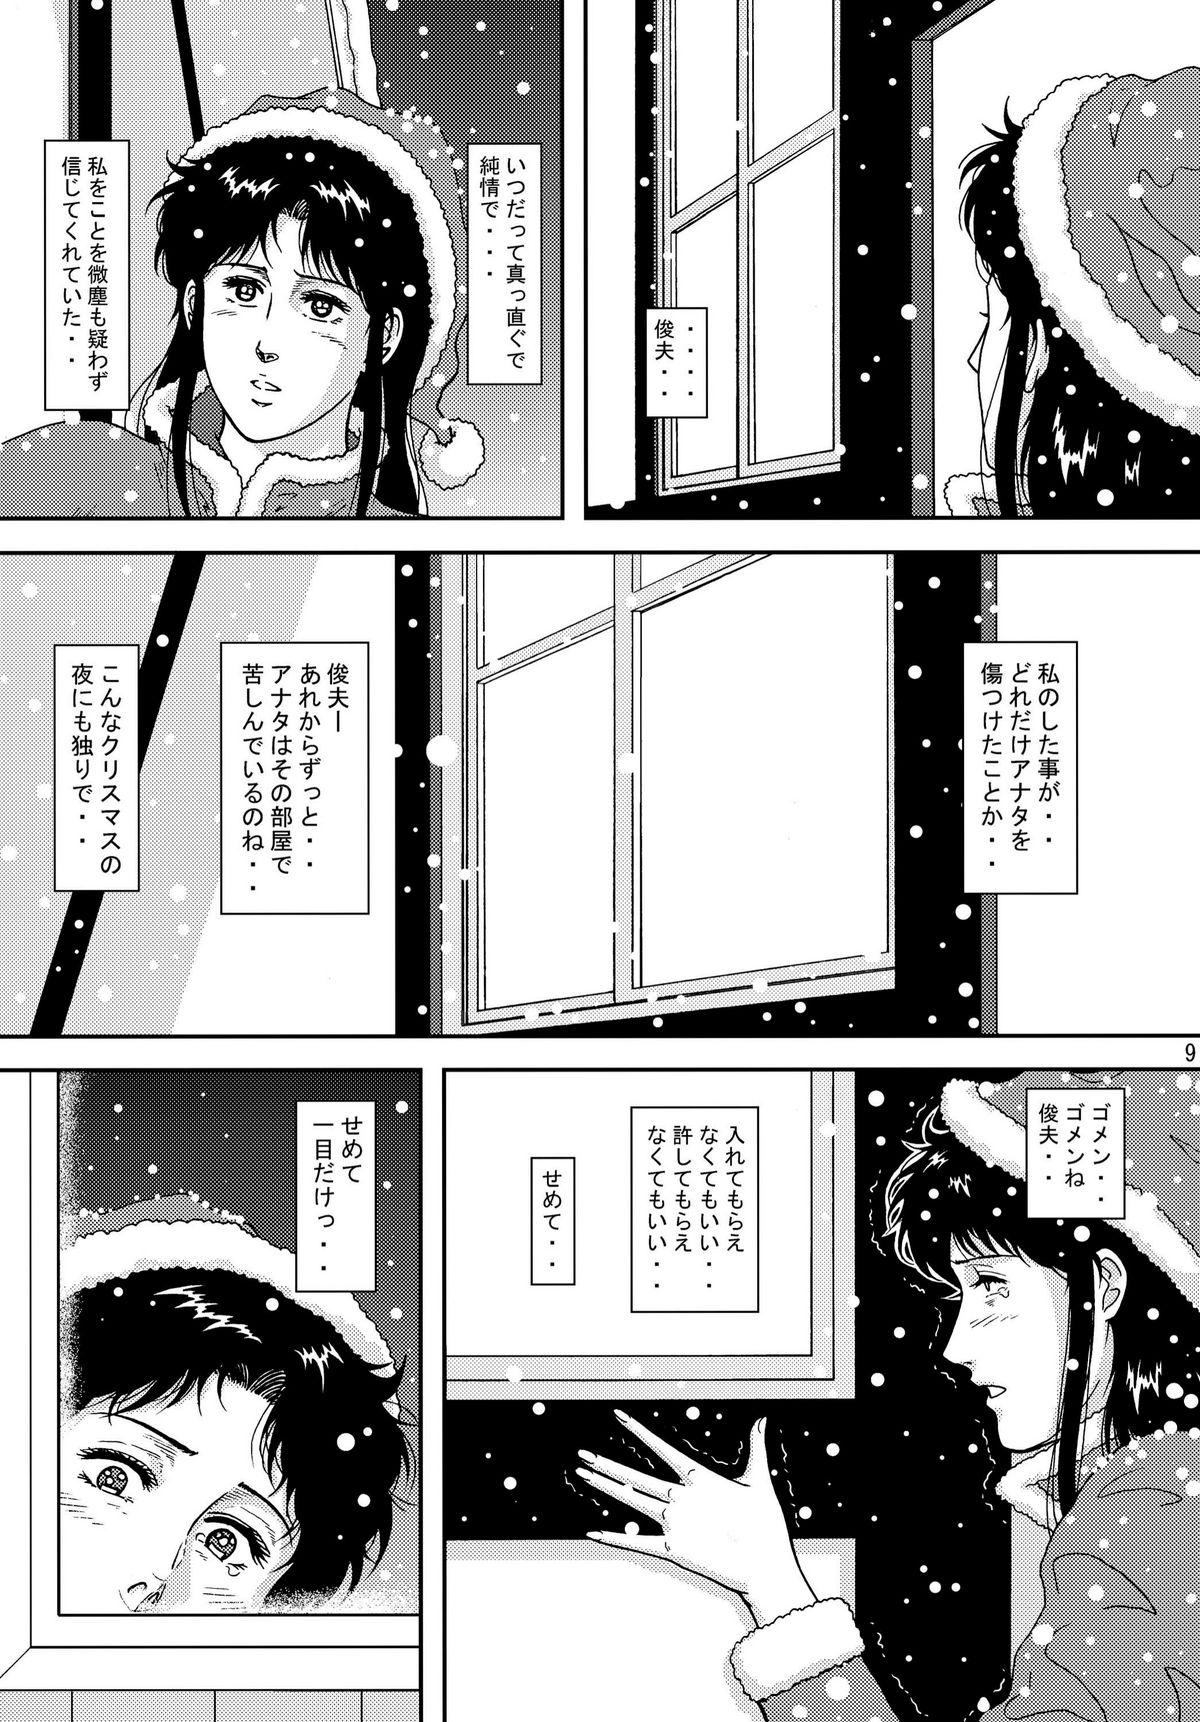 Stripping NIGHTFLY vol.10 PLEASE COME HOME for X'mas - Cats eye Family - Page 9